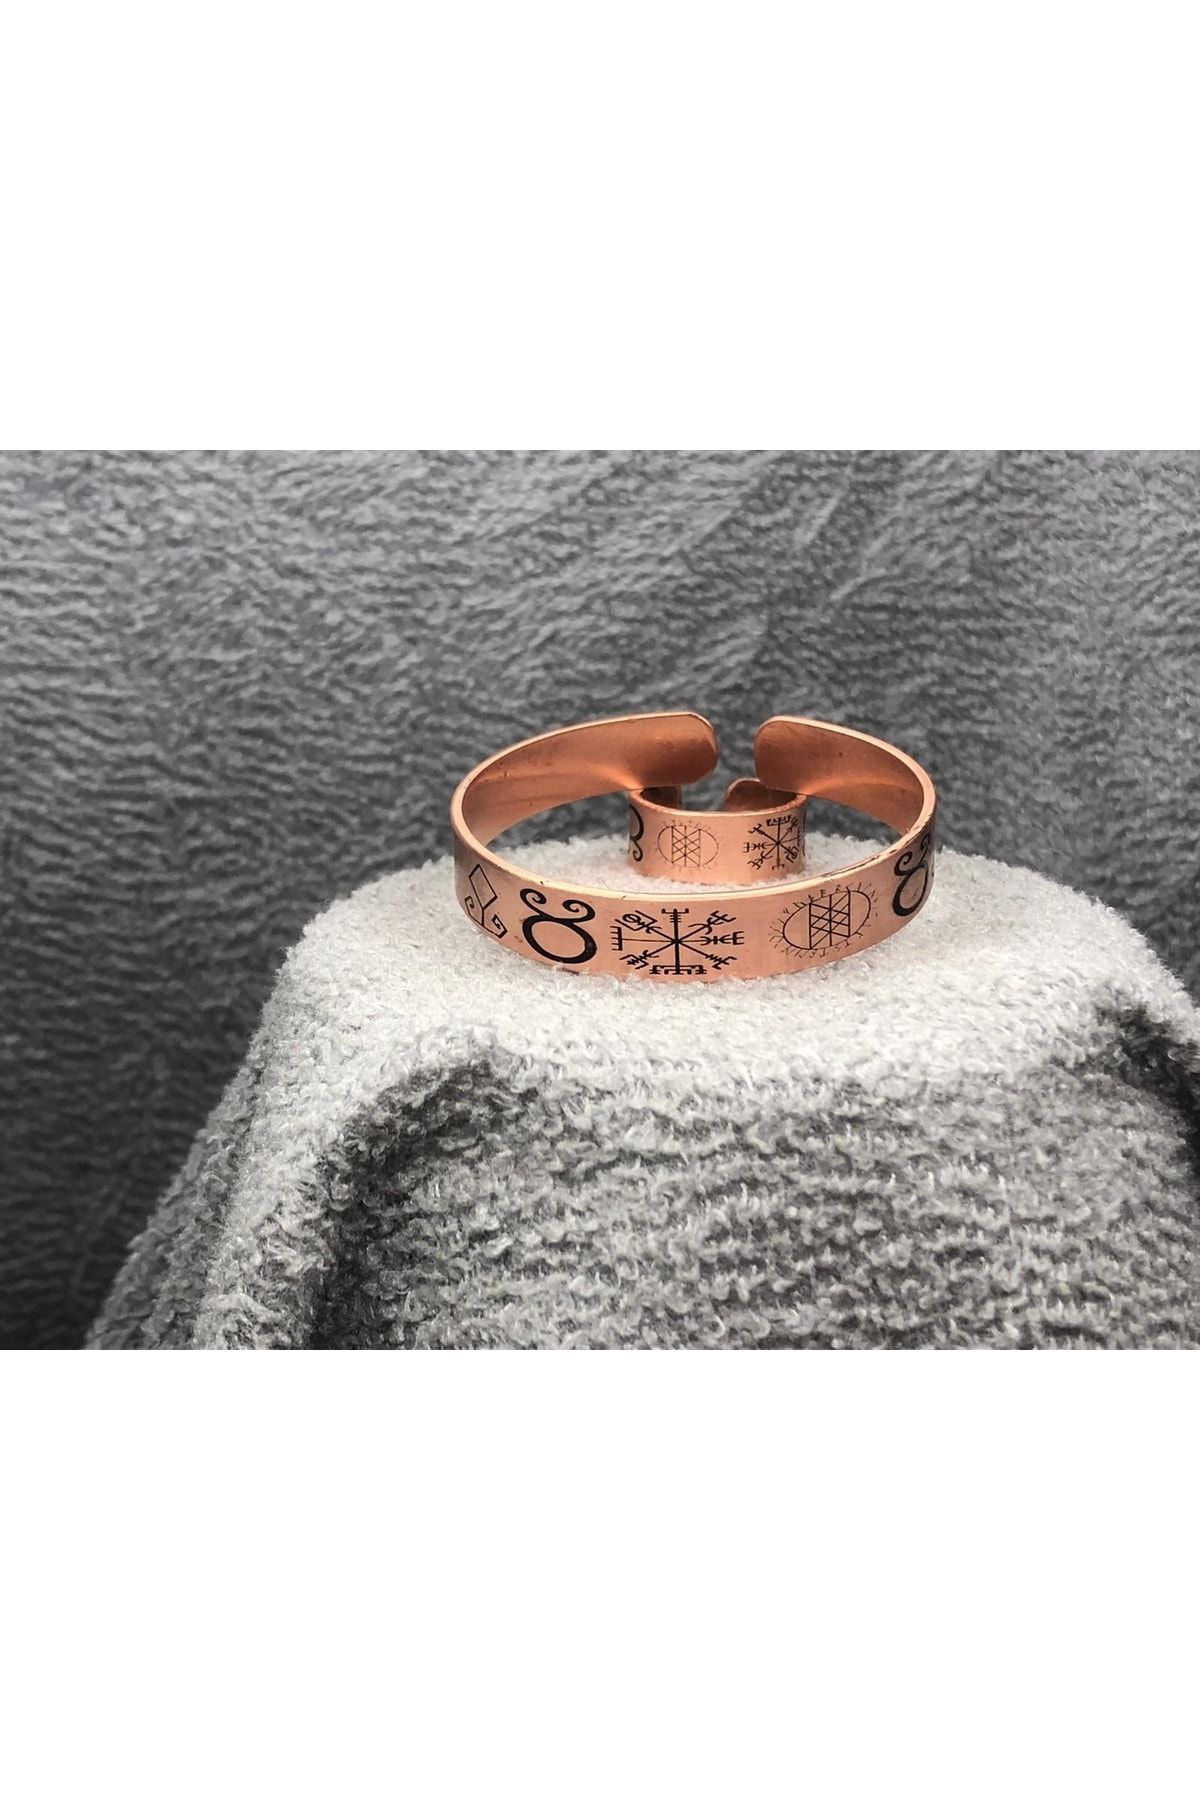 PenguinRing 100% Pure Copper Rows of Courage, Success, Luck, Health,  Control Rune Unisex Bracelet and Ring Set - Trendyol